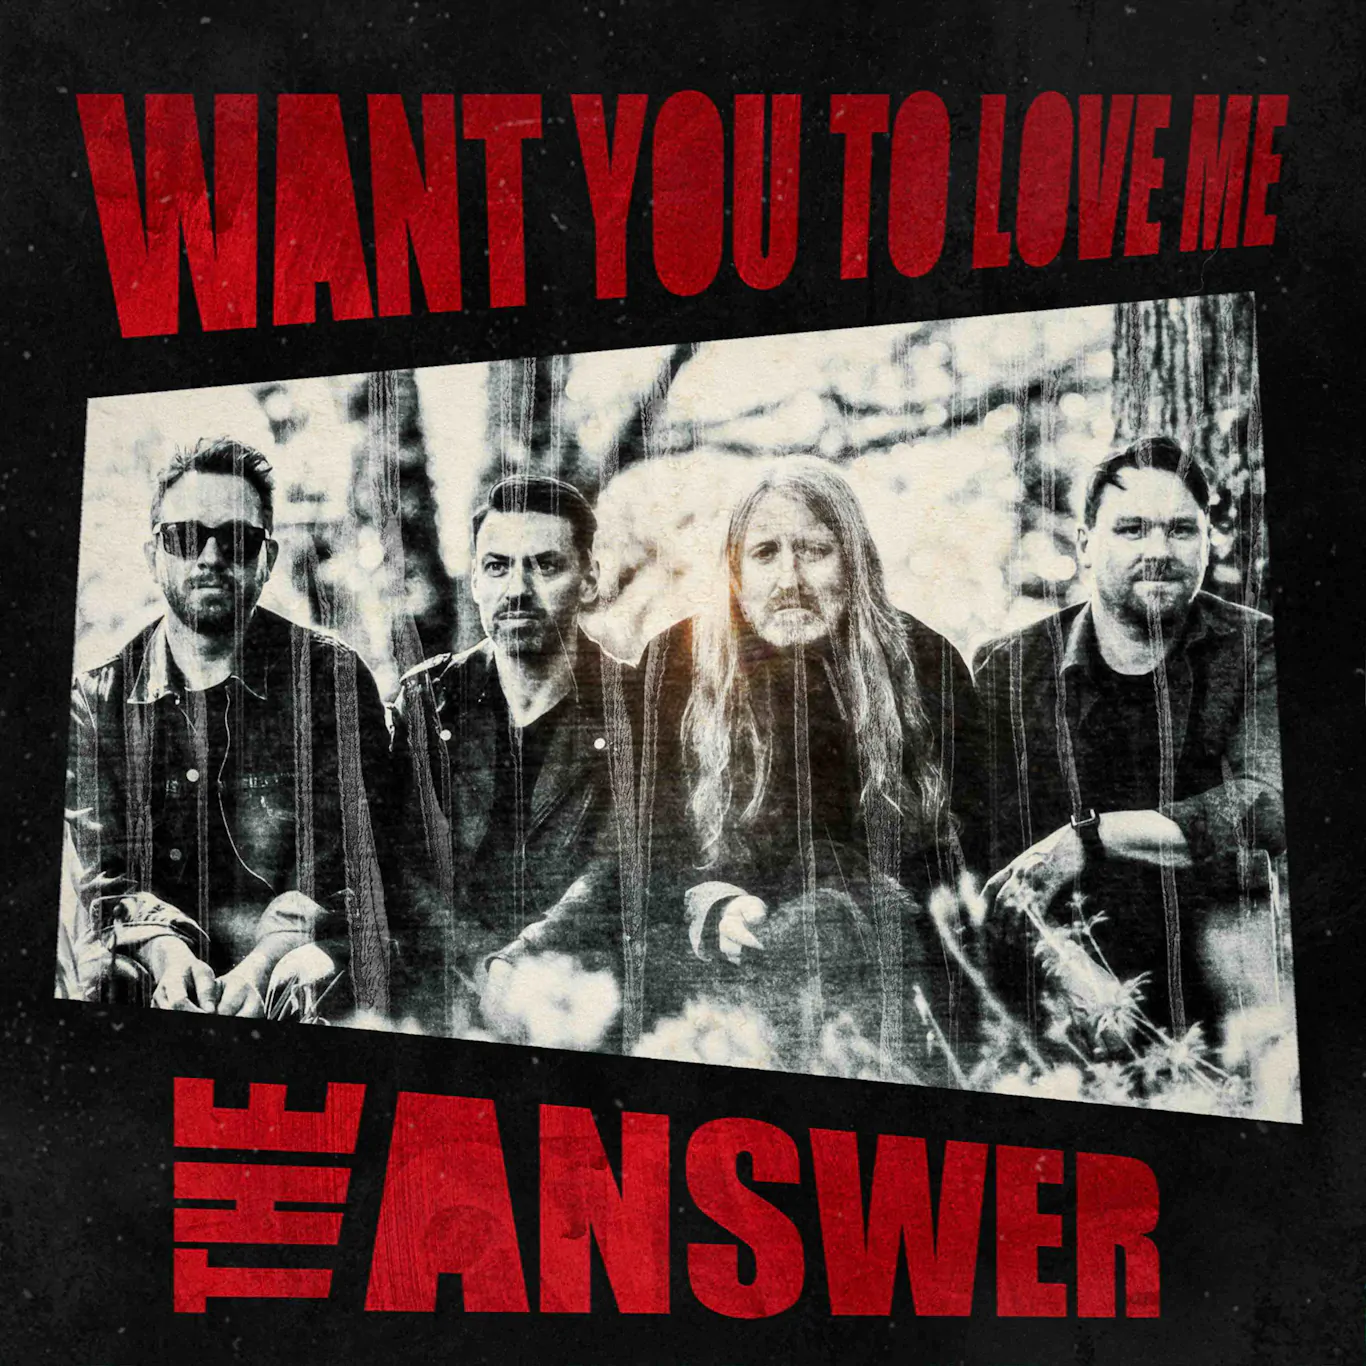 Northern Irish rockers THE ANSWER share new track ‘Want You To Love Me’